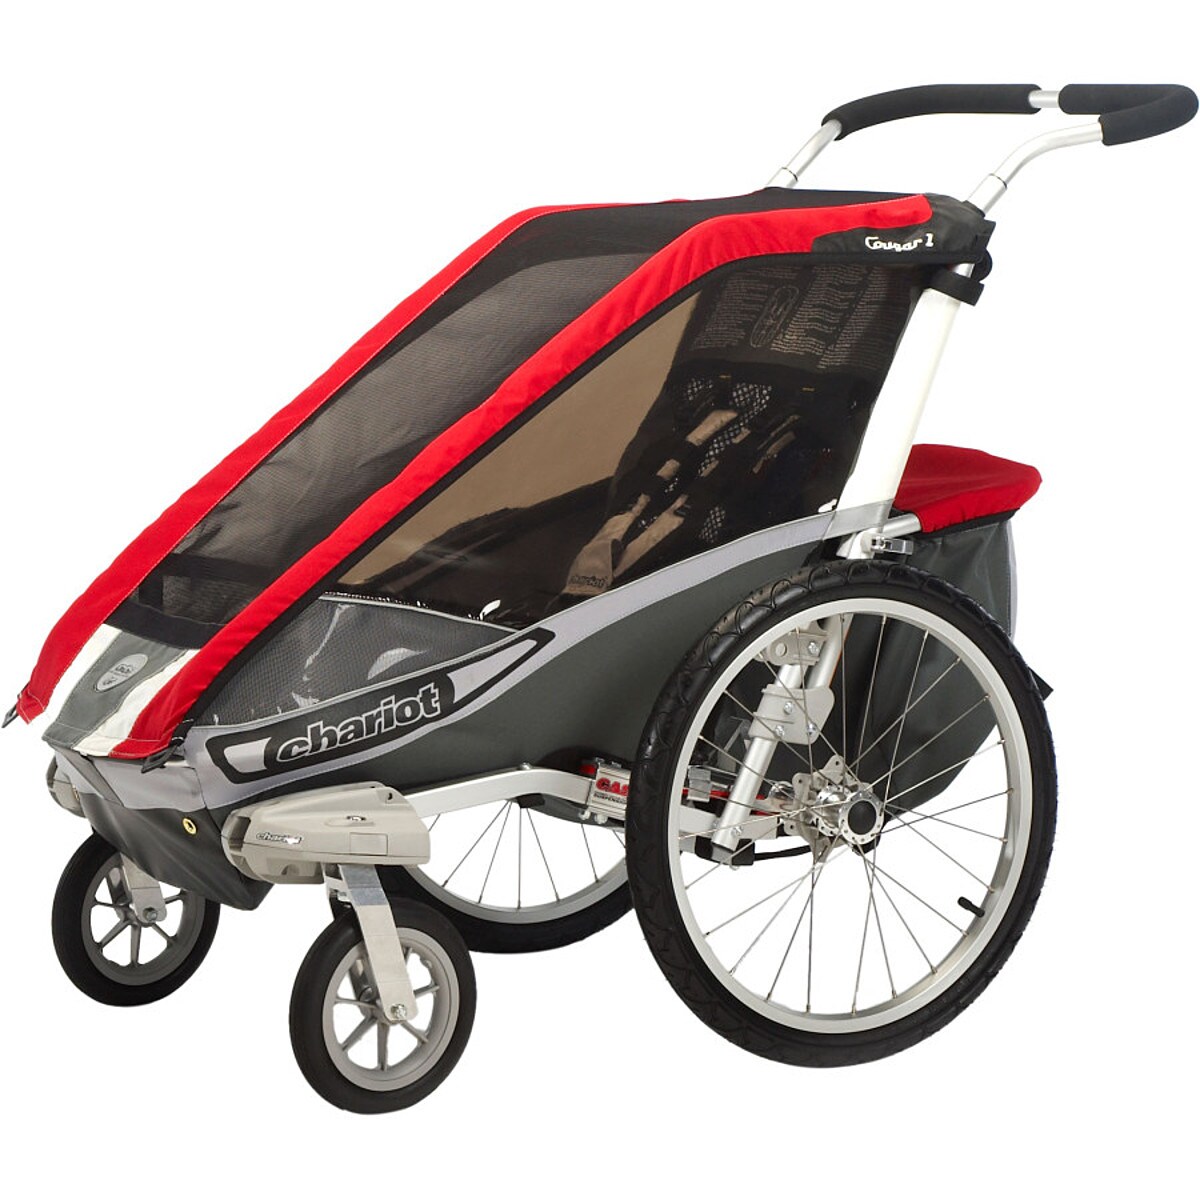 Thule Chariot Cougar 1 Stroller with Strolling Kit Red, One Size